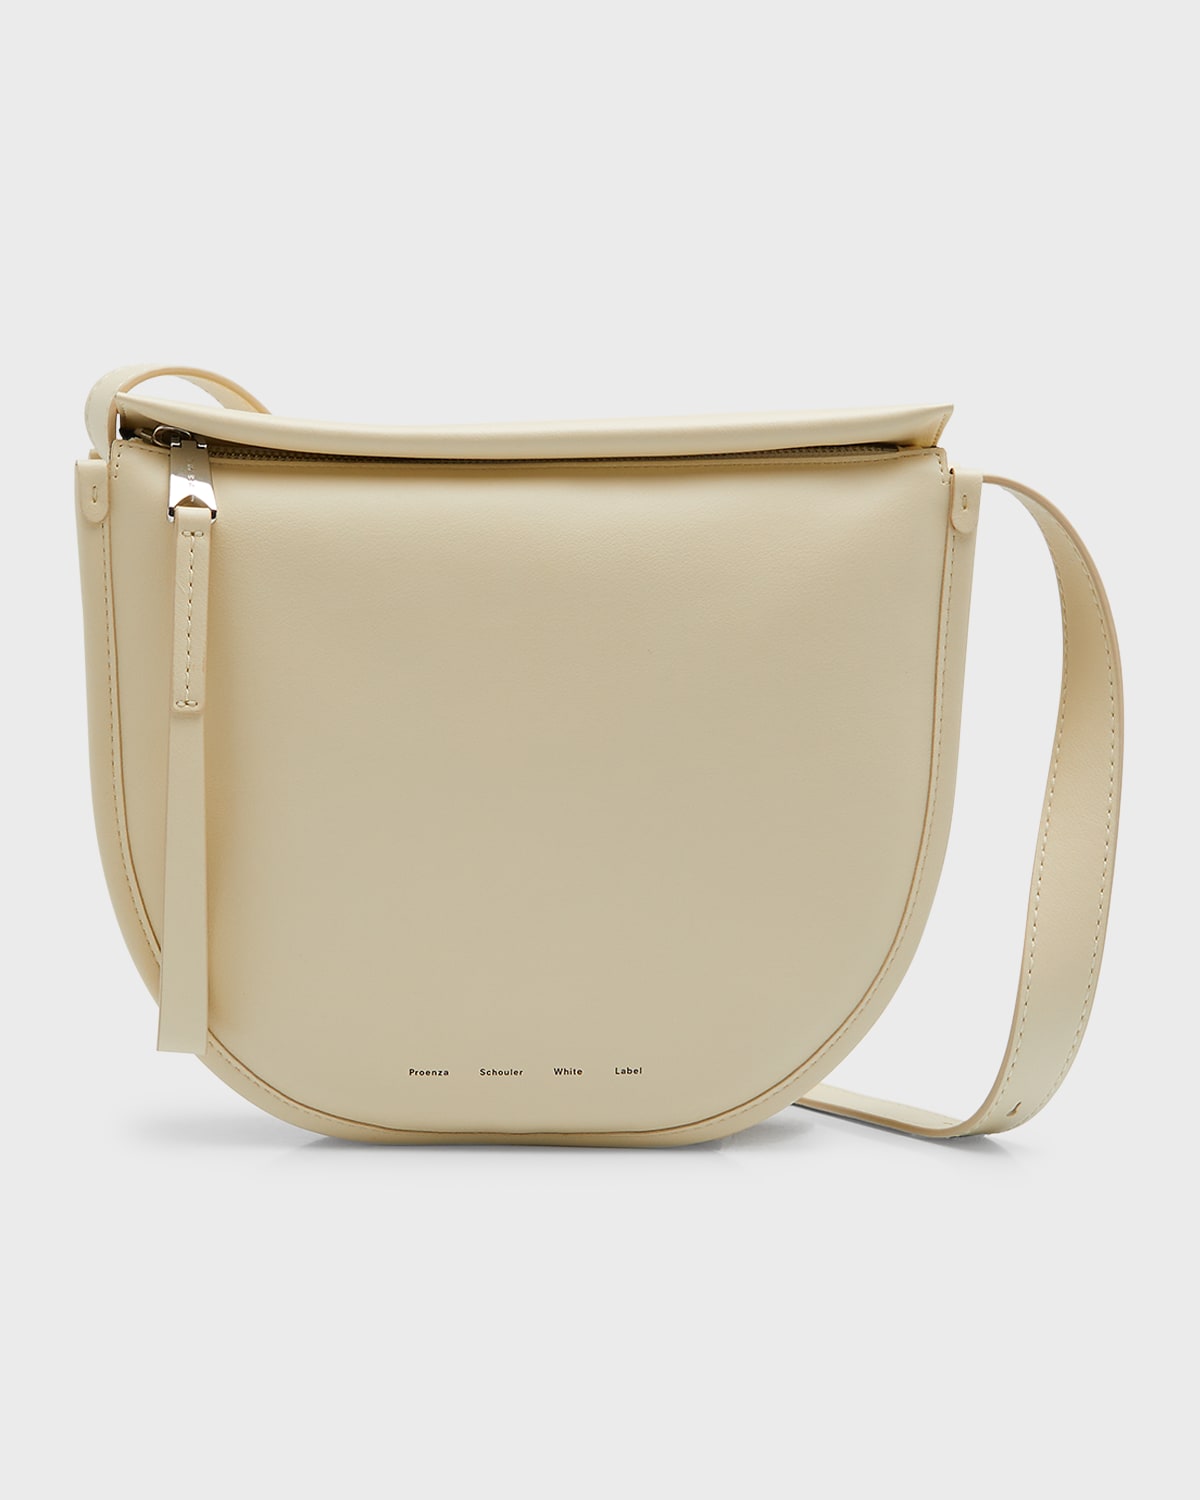 PROENZA SCHOULER WHITE LABEL BAXTER SMALL LEATHER HOBO BAG